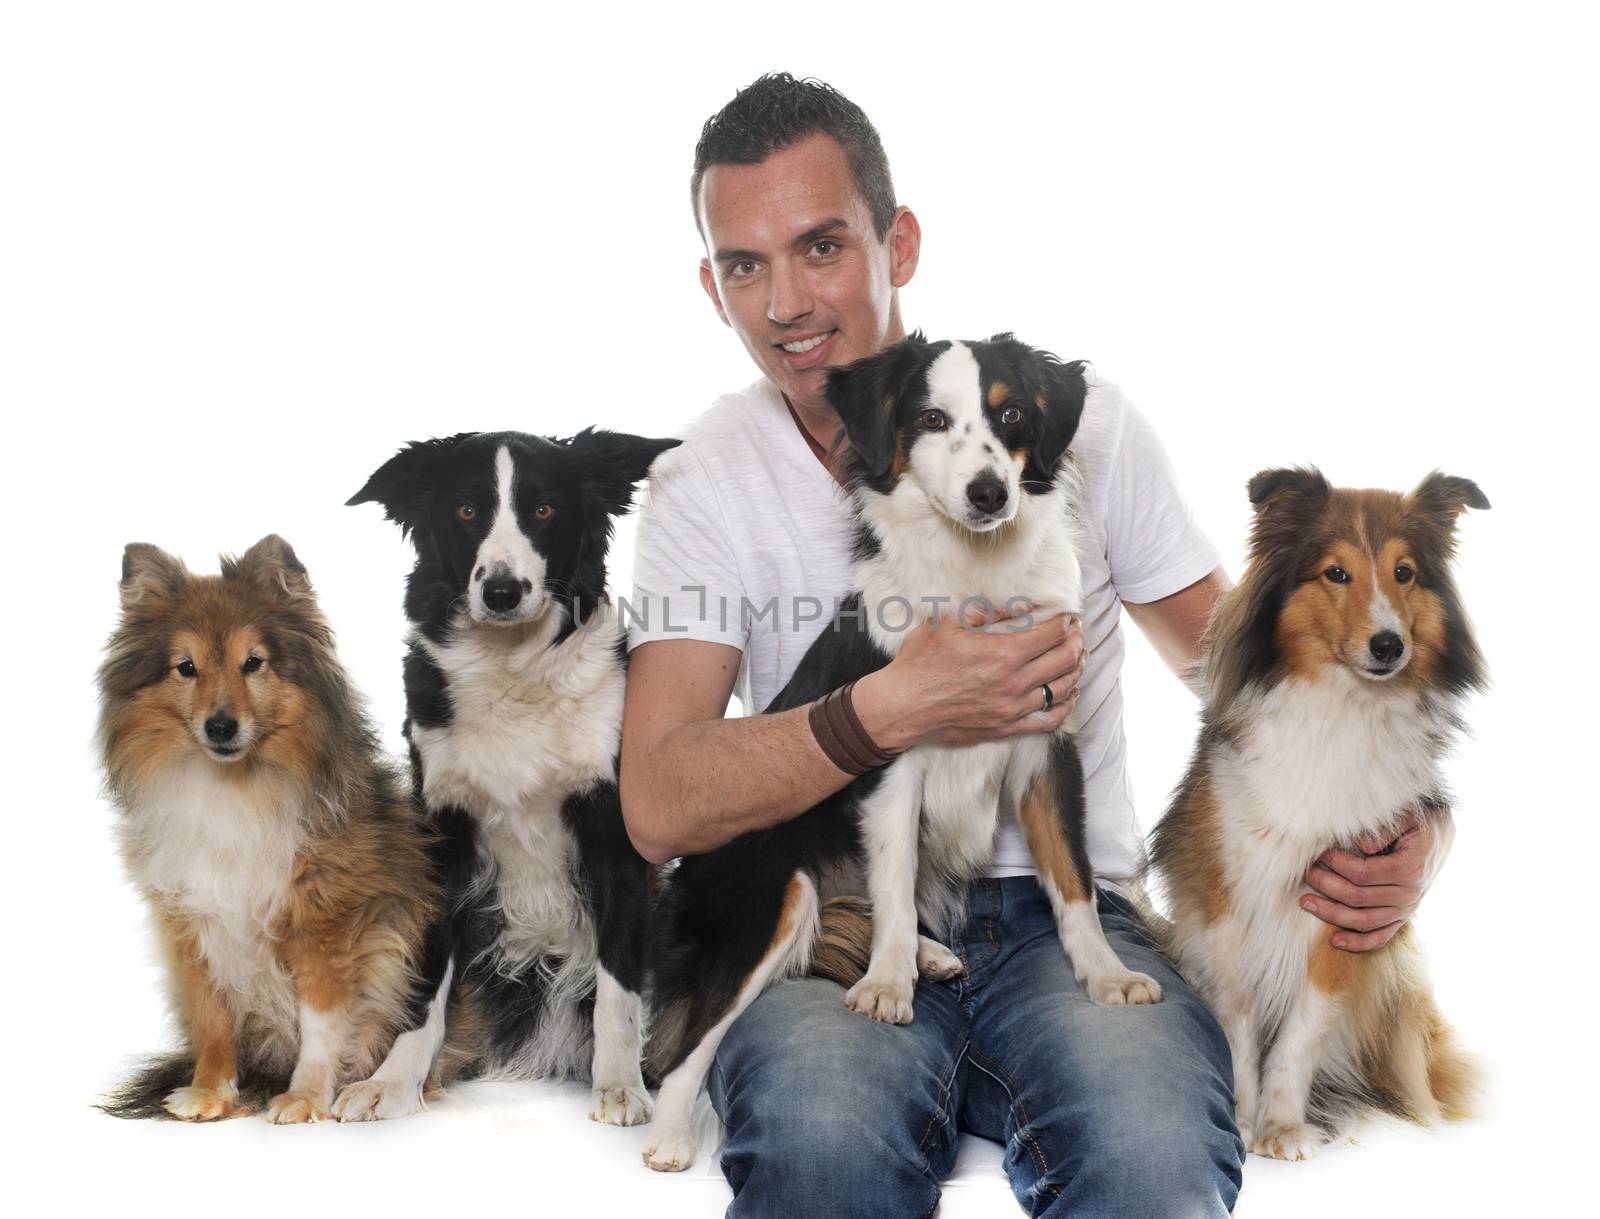 four beautiful dogs and man by cynoclub